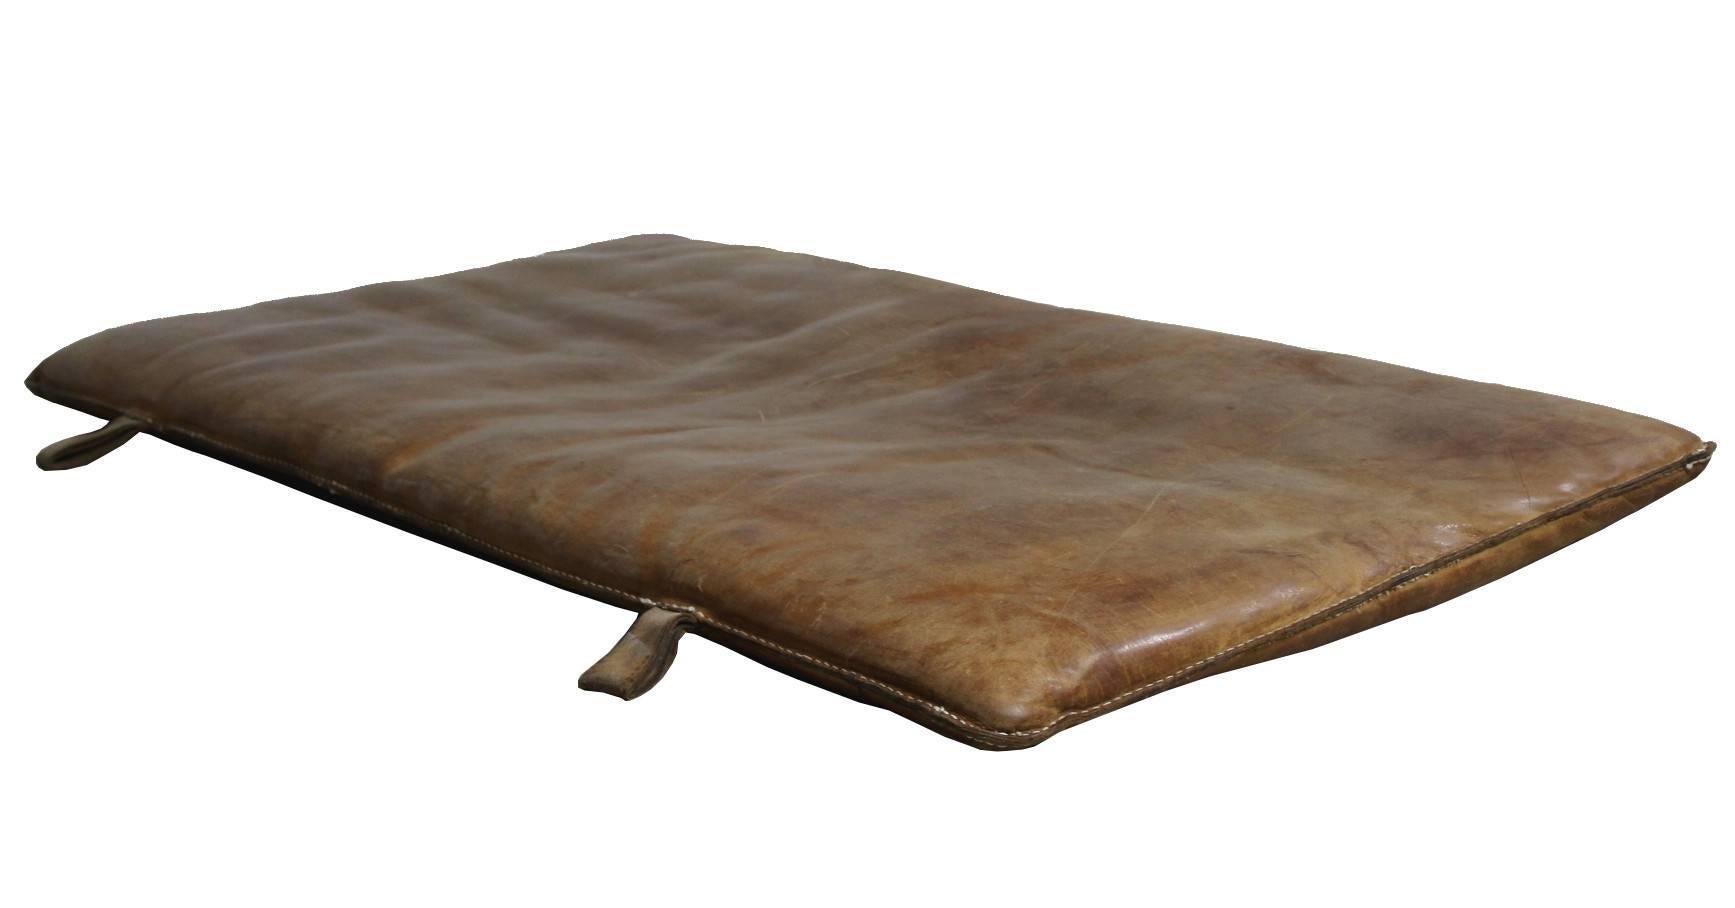 Large leather gym mat from the 1950s in original vintage condition.